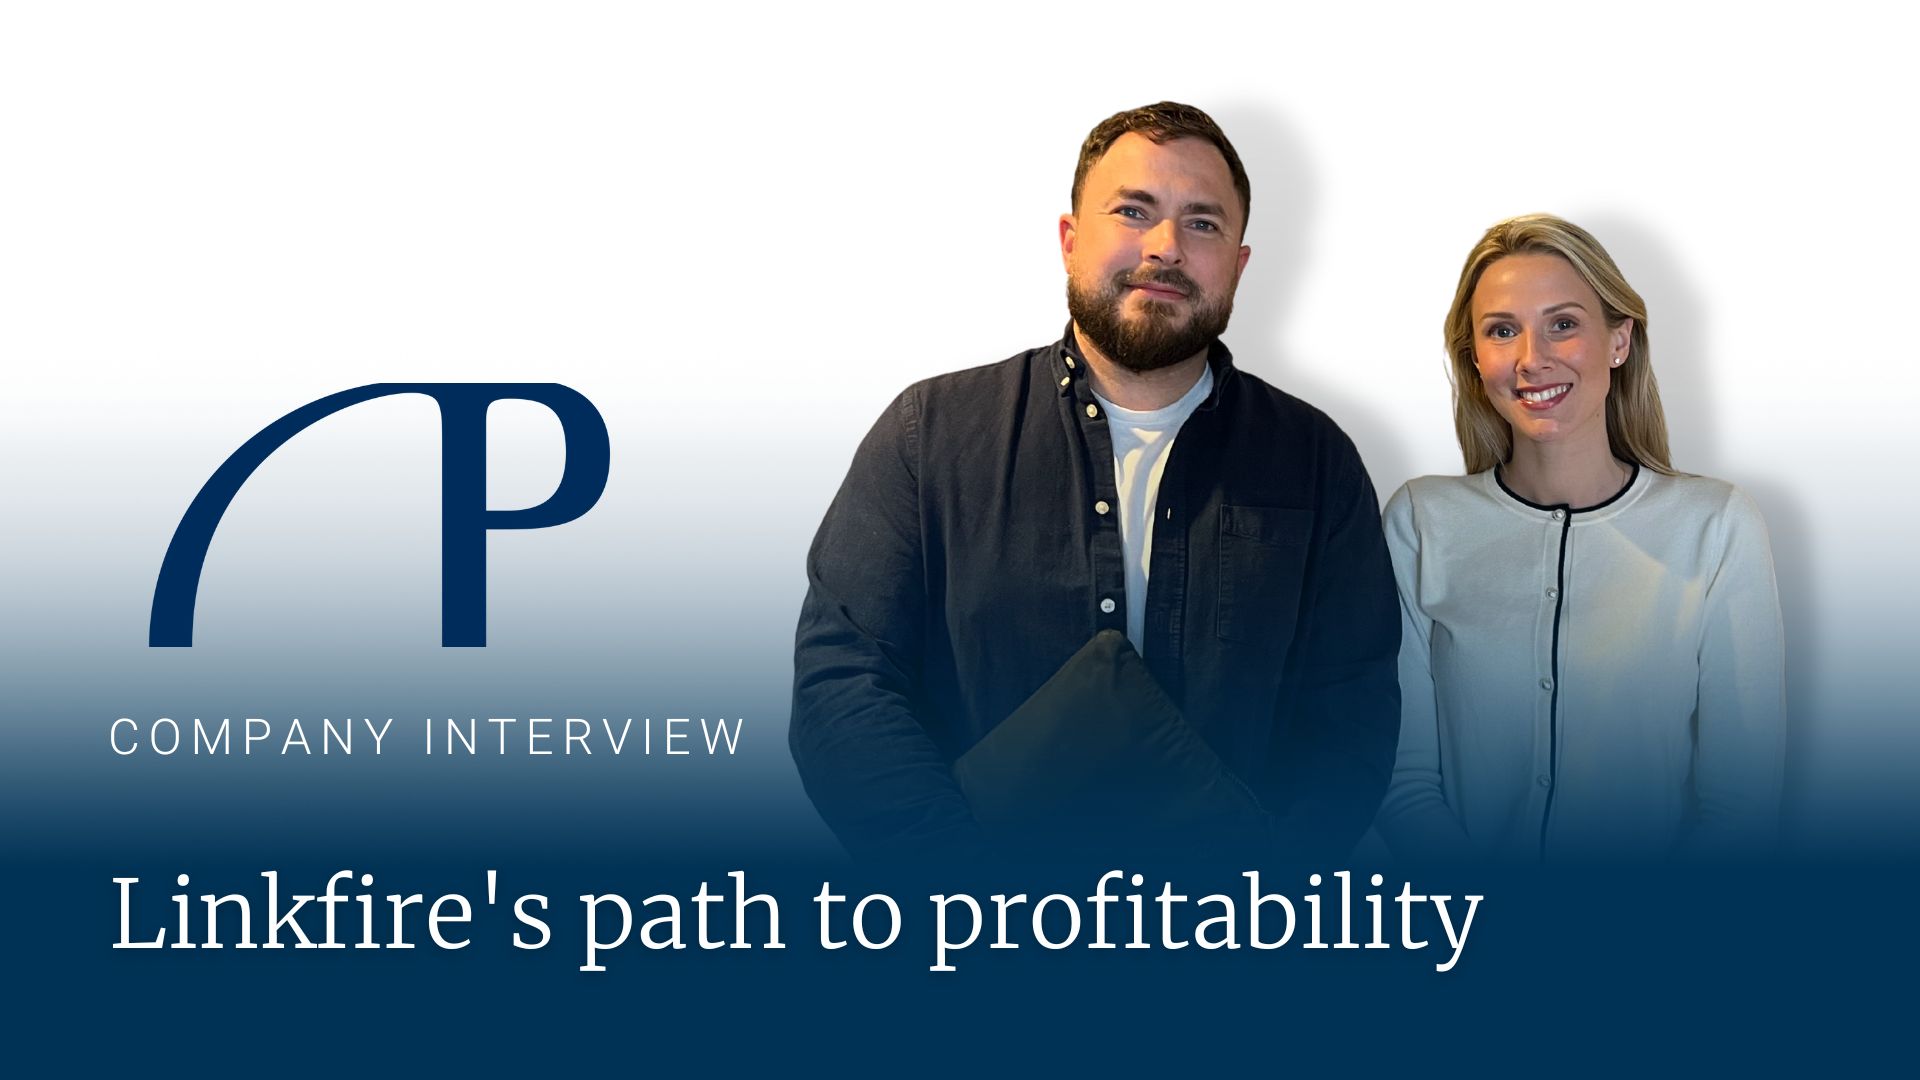 Get to Know the Company: Linkfire's path to profitability